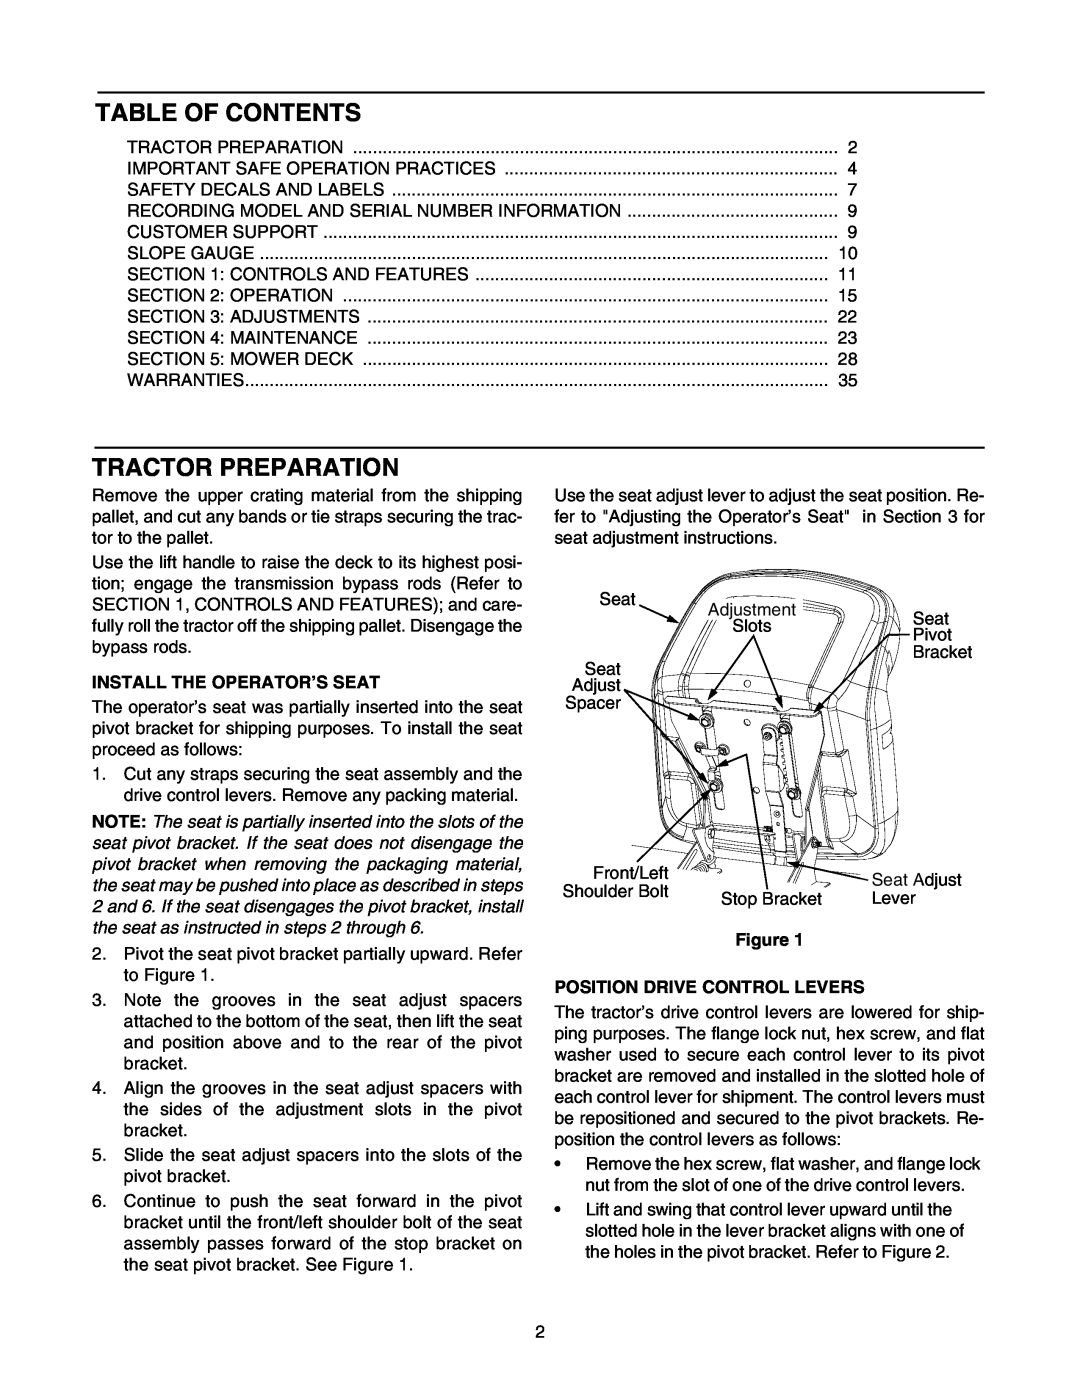 Troy-Bilt RZT 50 manual Table Of Contents, Tractor Preparation, Install The Operator’S Seat, Position Drive Control Levers 